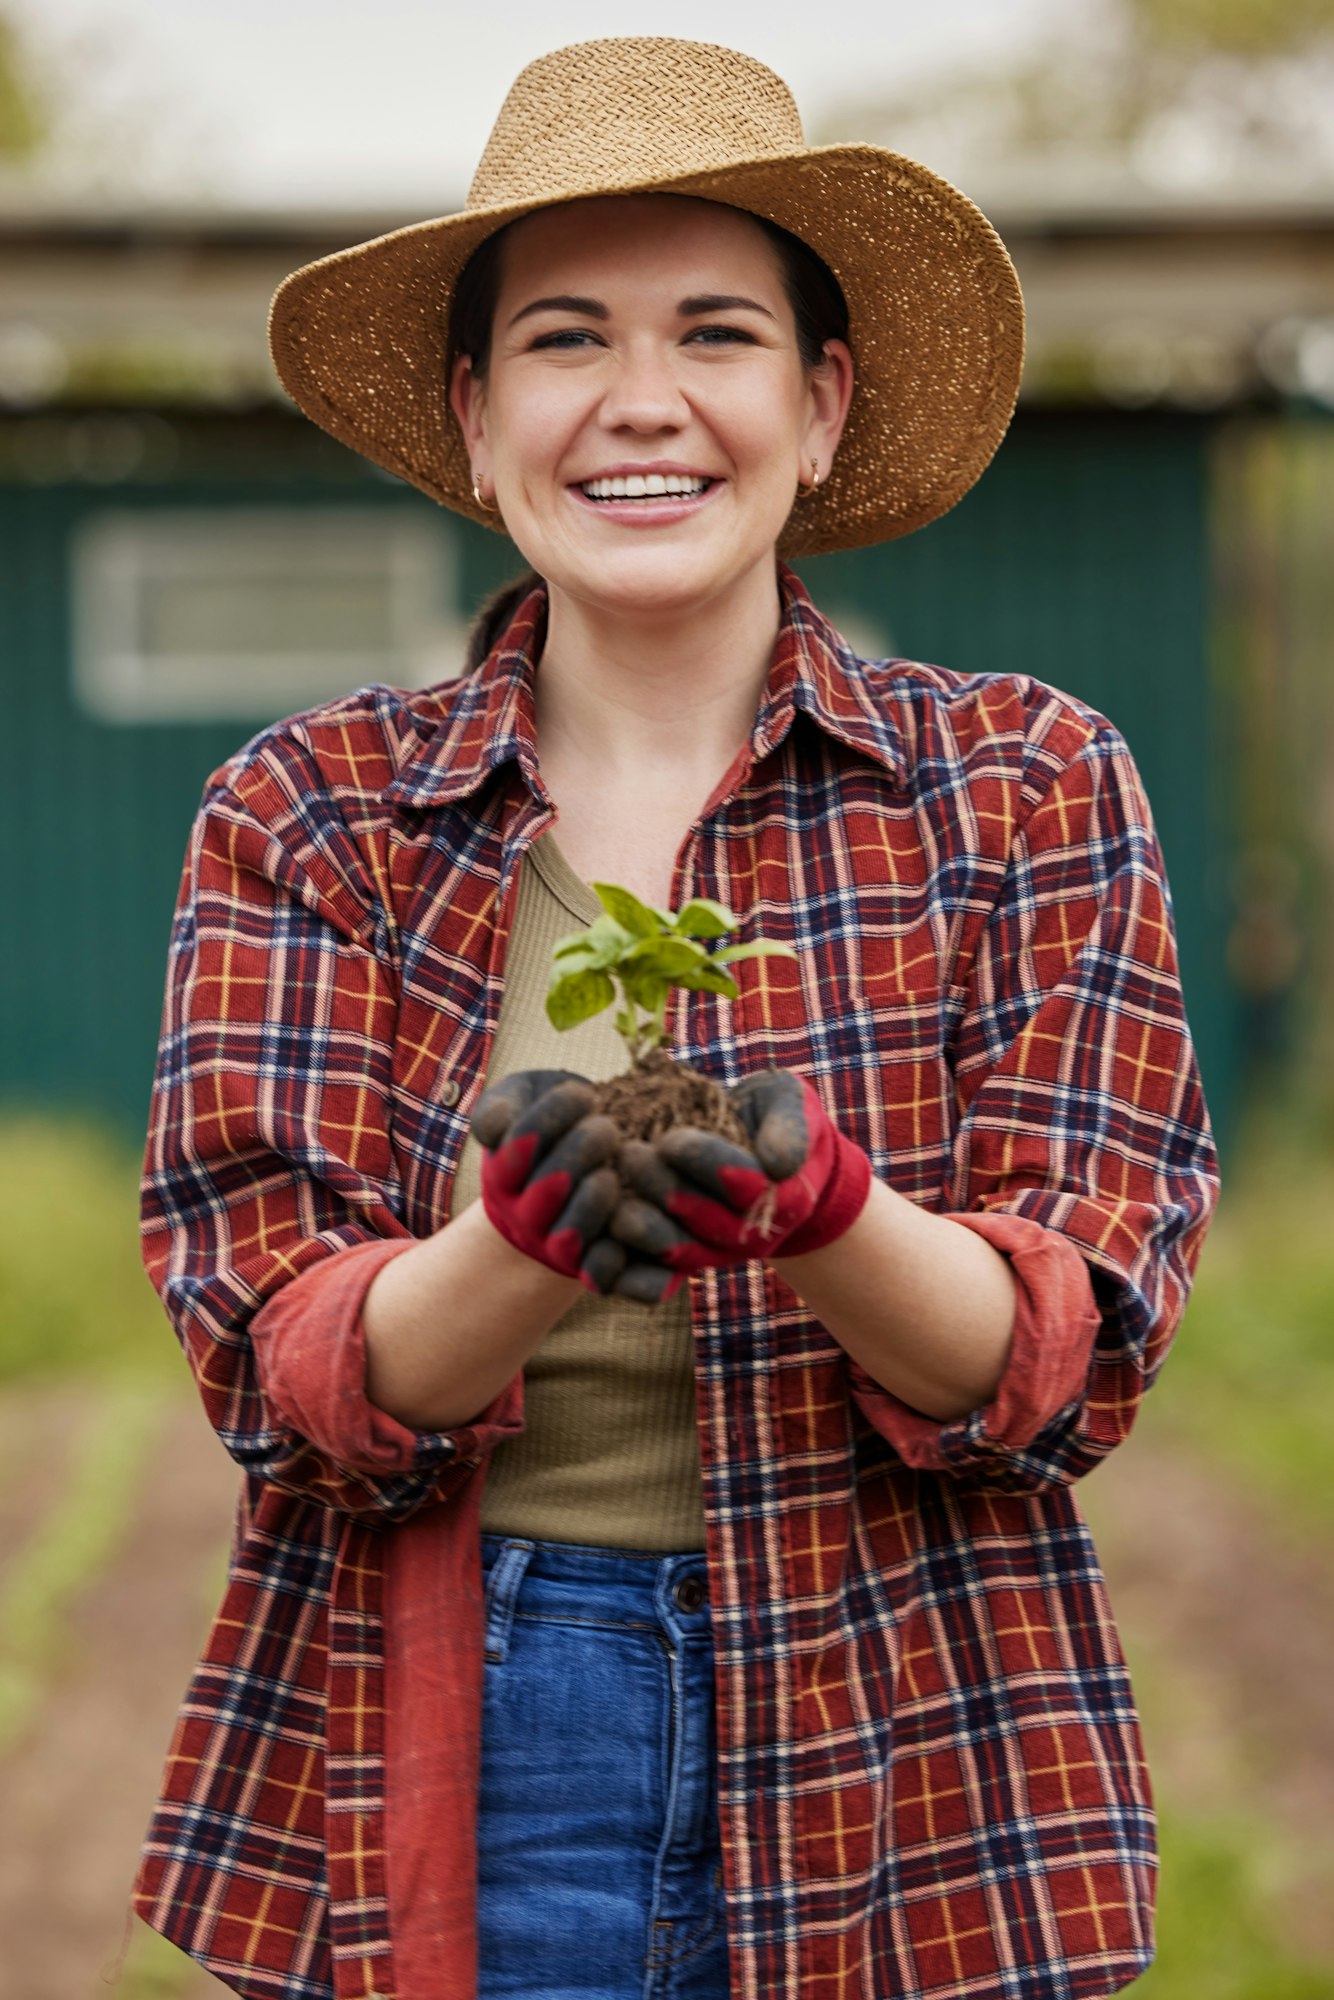 Sustainable farmer holding a plant or seedling outdoors smiling and happy about her organic farm or